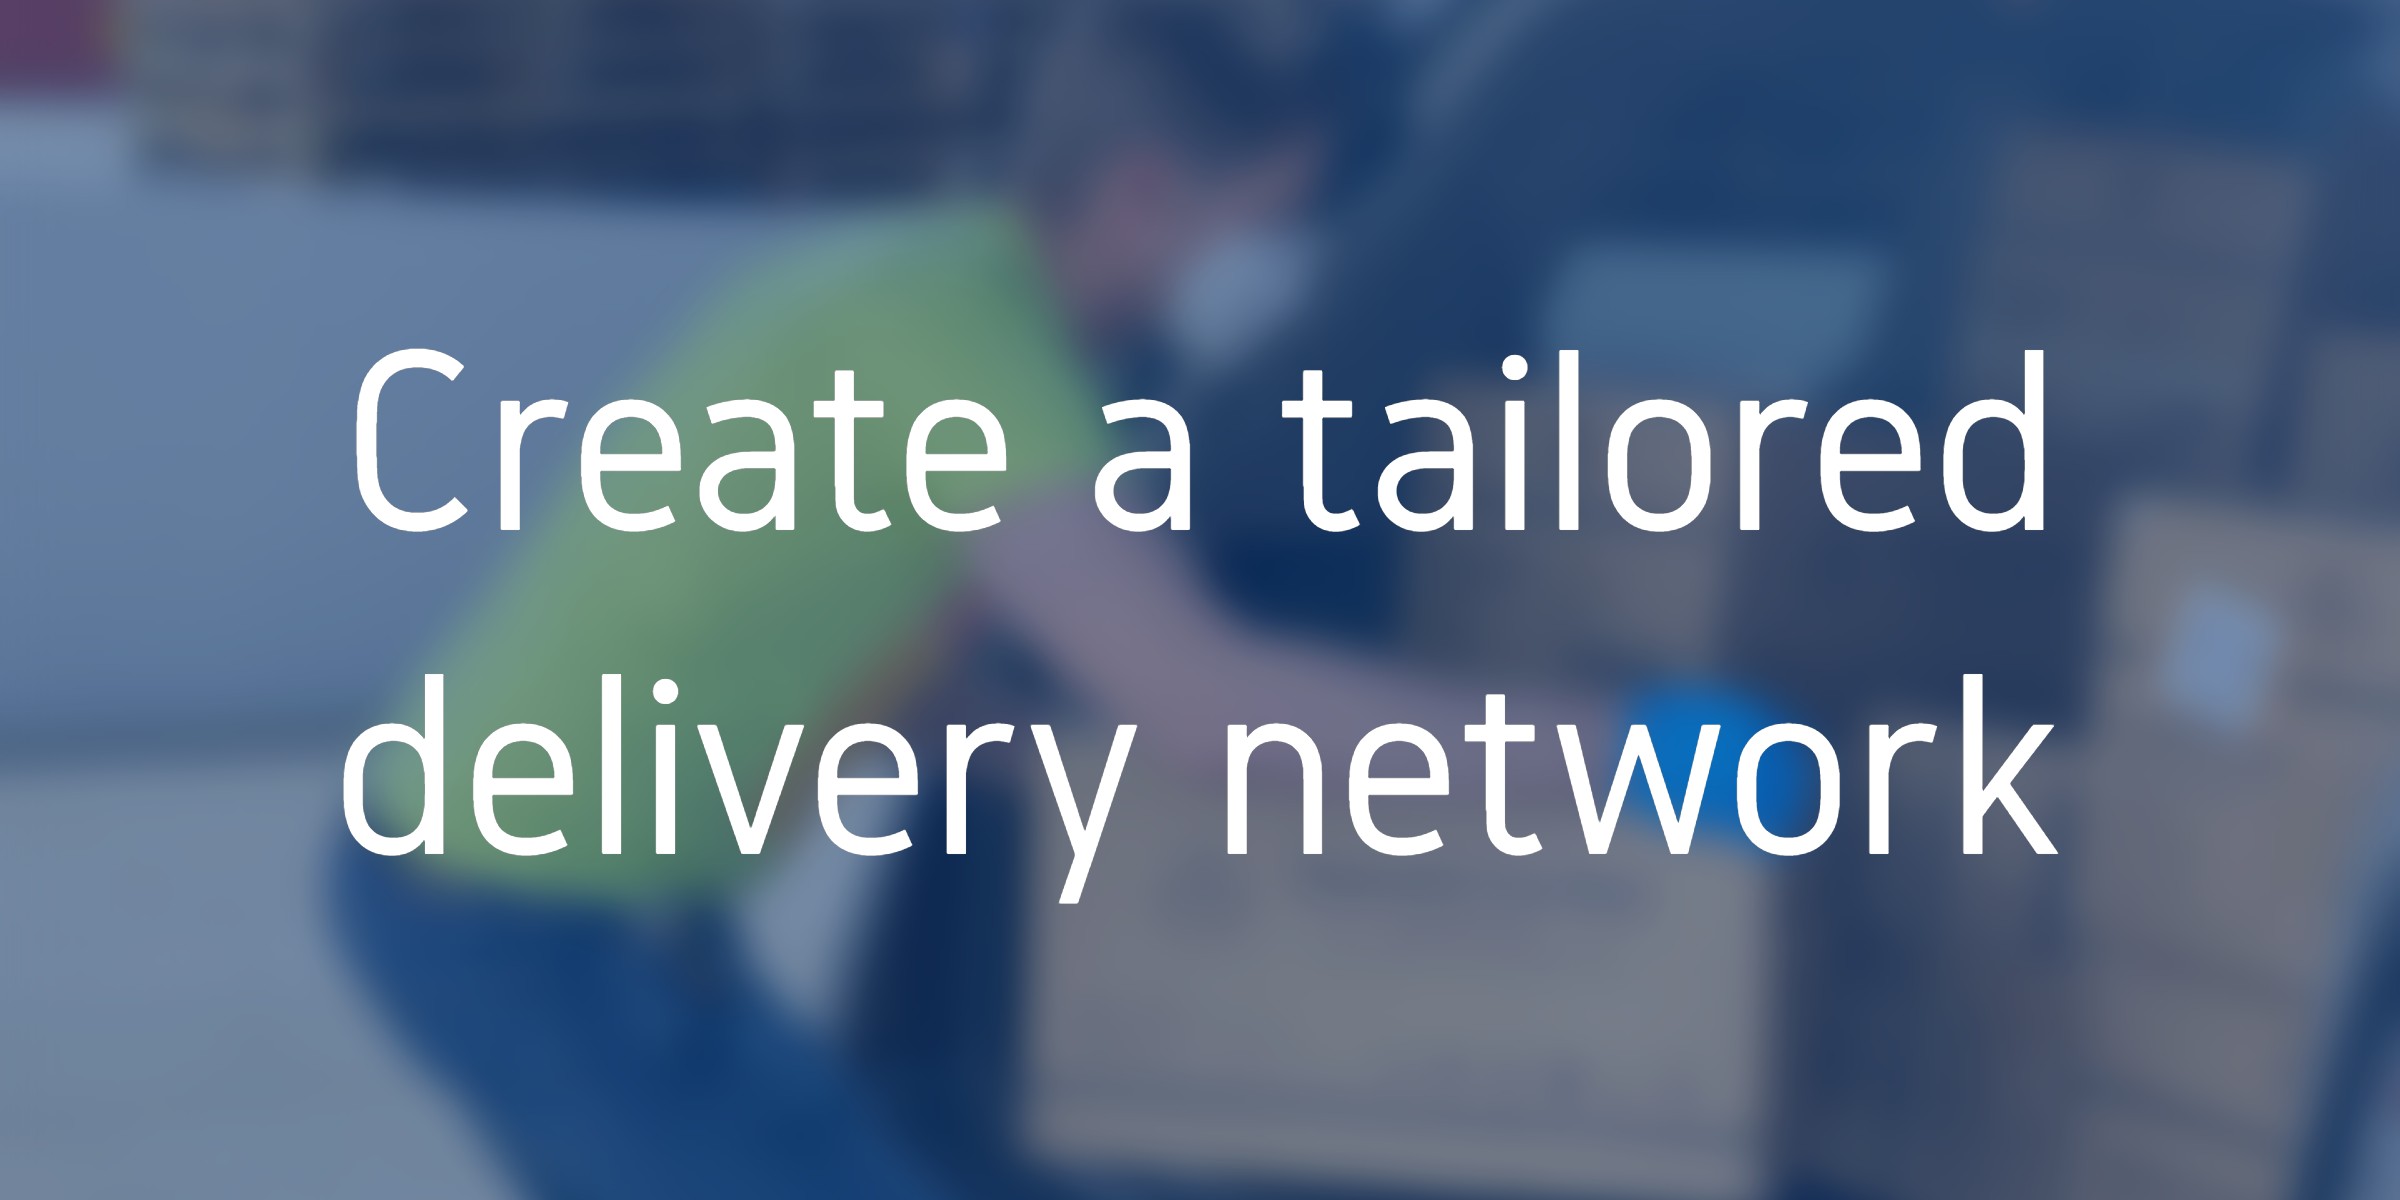 Create a tailored delivery network